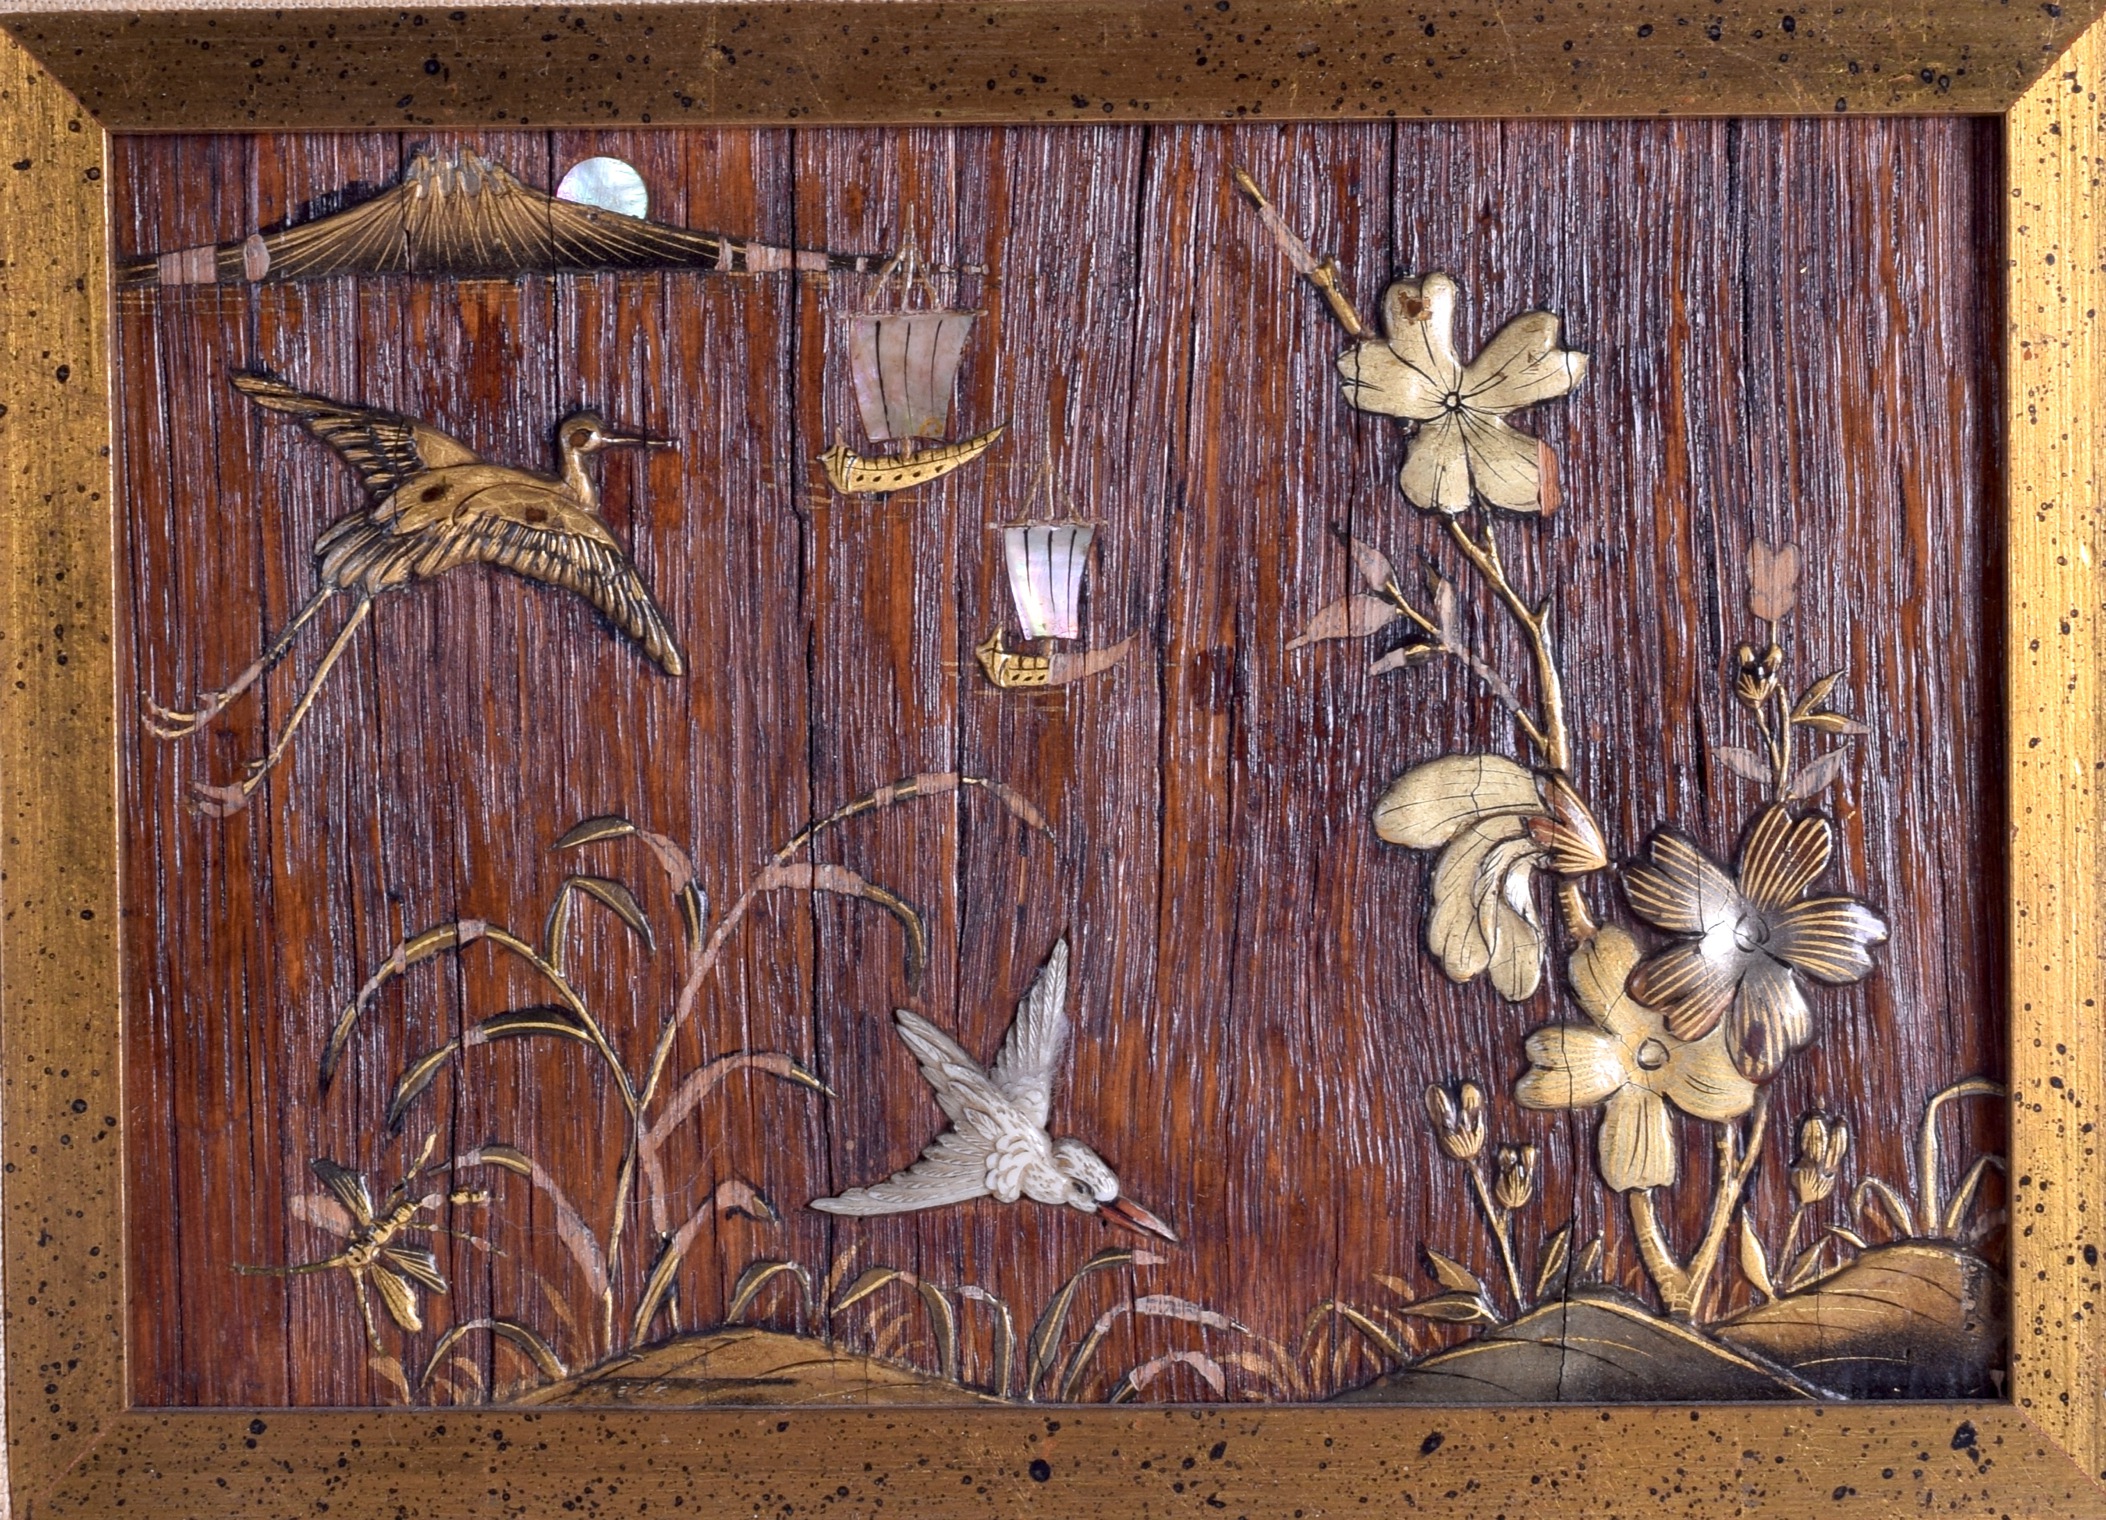 A SET OF THREE LATE 19TH CENTURY JAPANESE MEIJI PERIOD LACQUERED BAMBOO PANELS decorated with